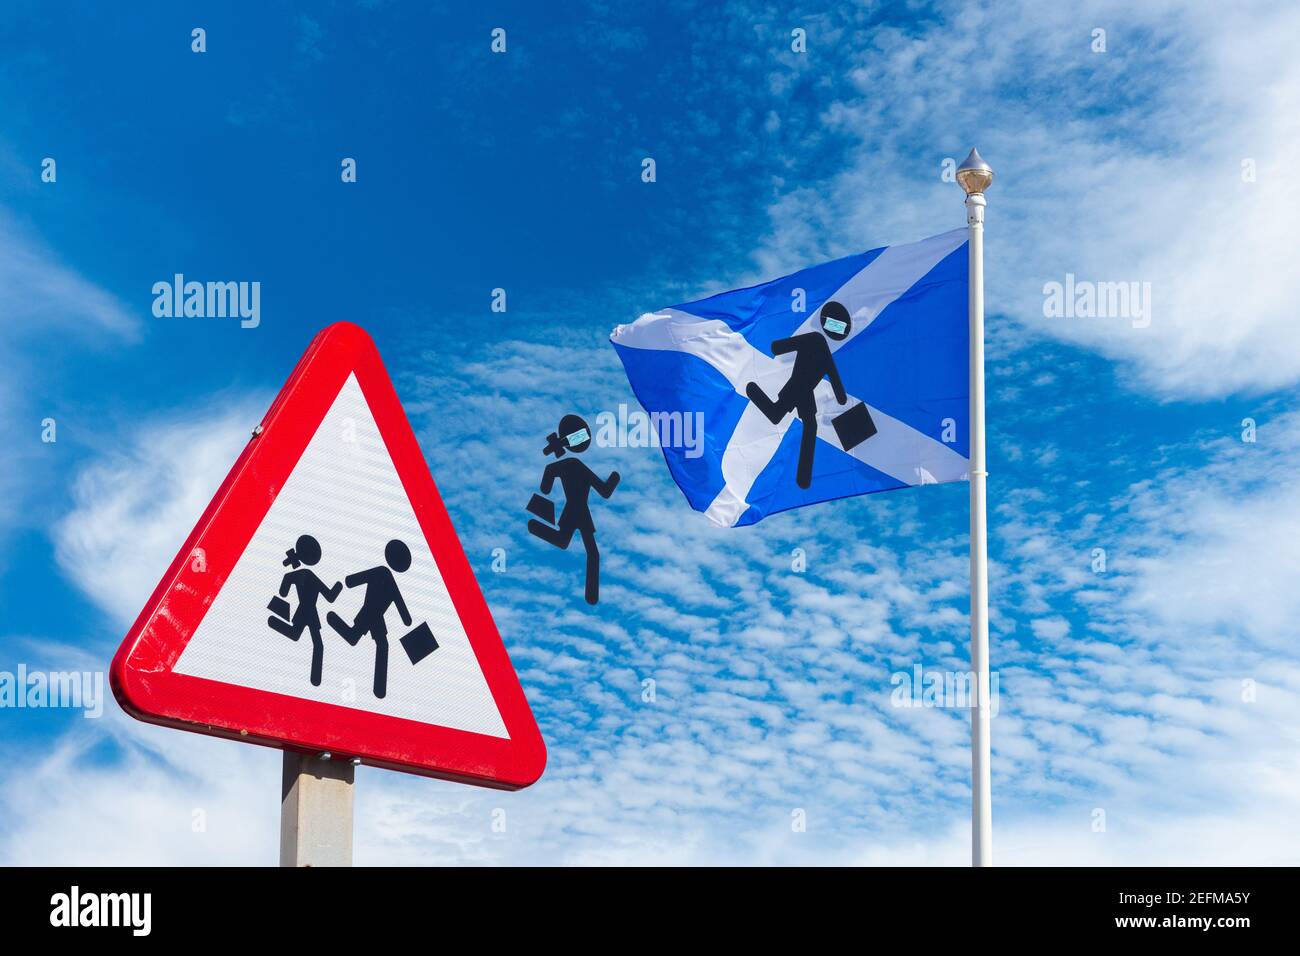 Back to school Scotland education concept: School sign and flag of Scotland against blue sky with children with face masks jumping from sign to flag. Stock Photo